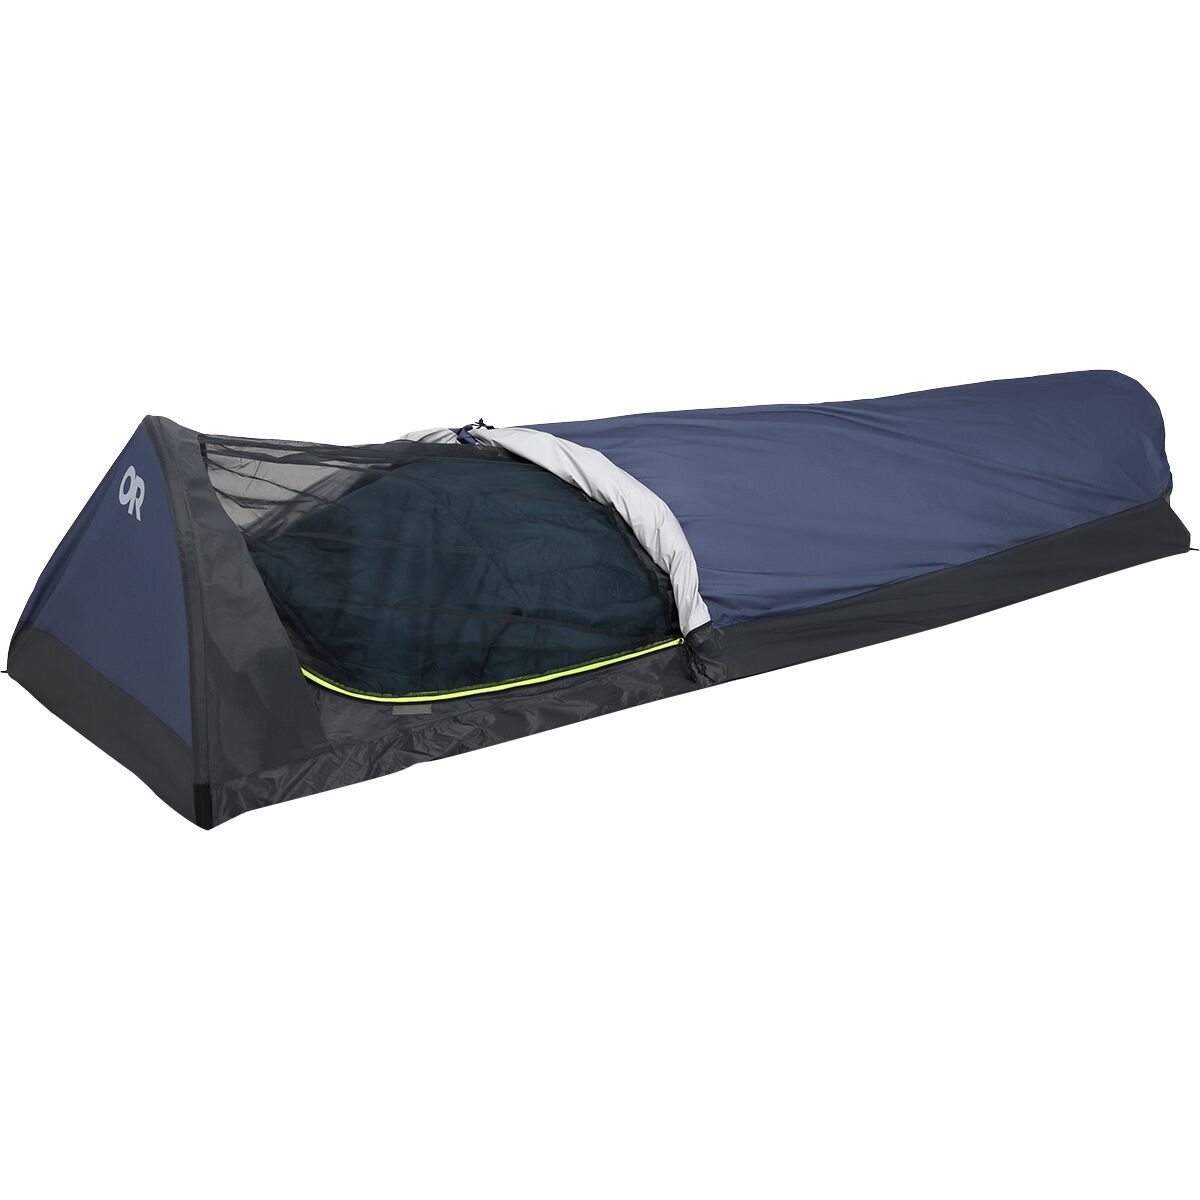 Outdoor Research Alpine AscentShell Bivy - Hike & Camp